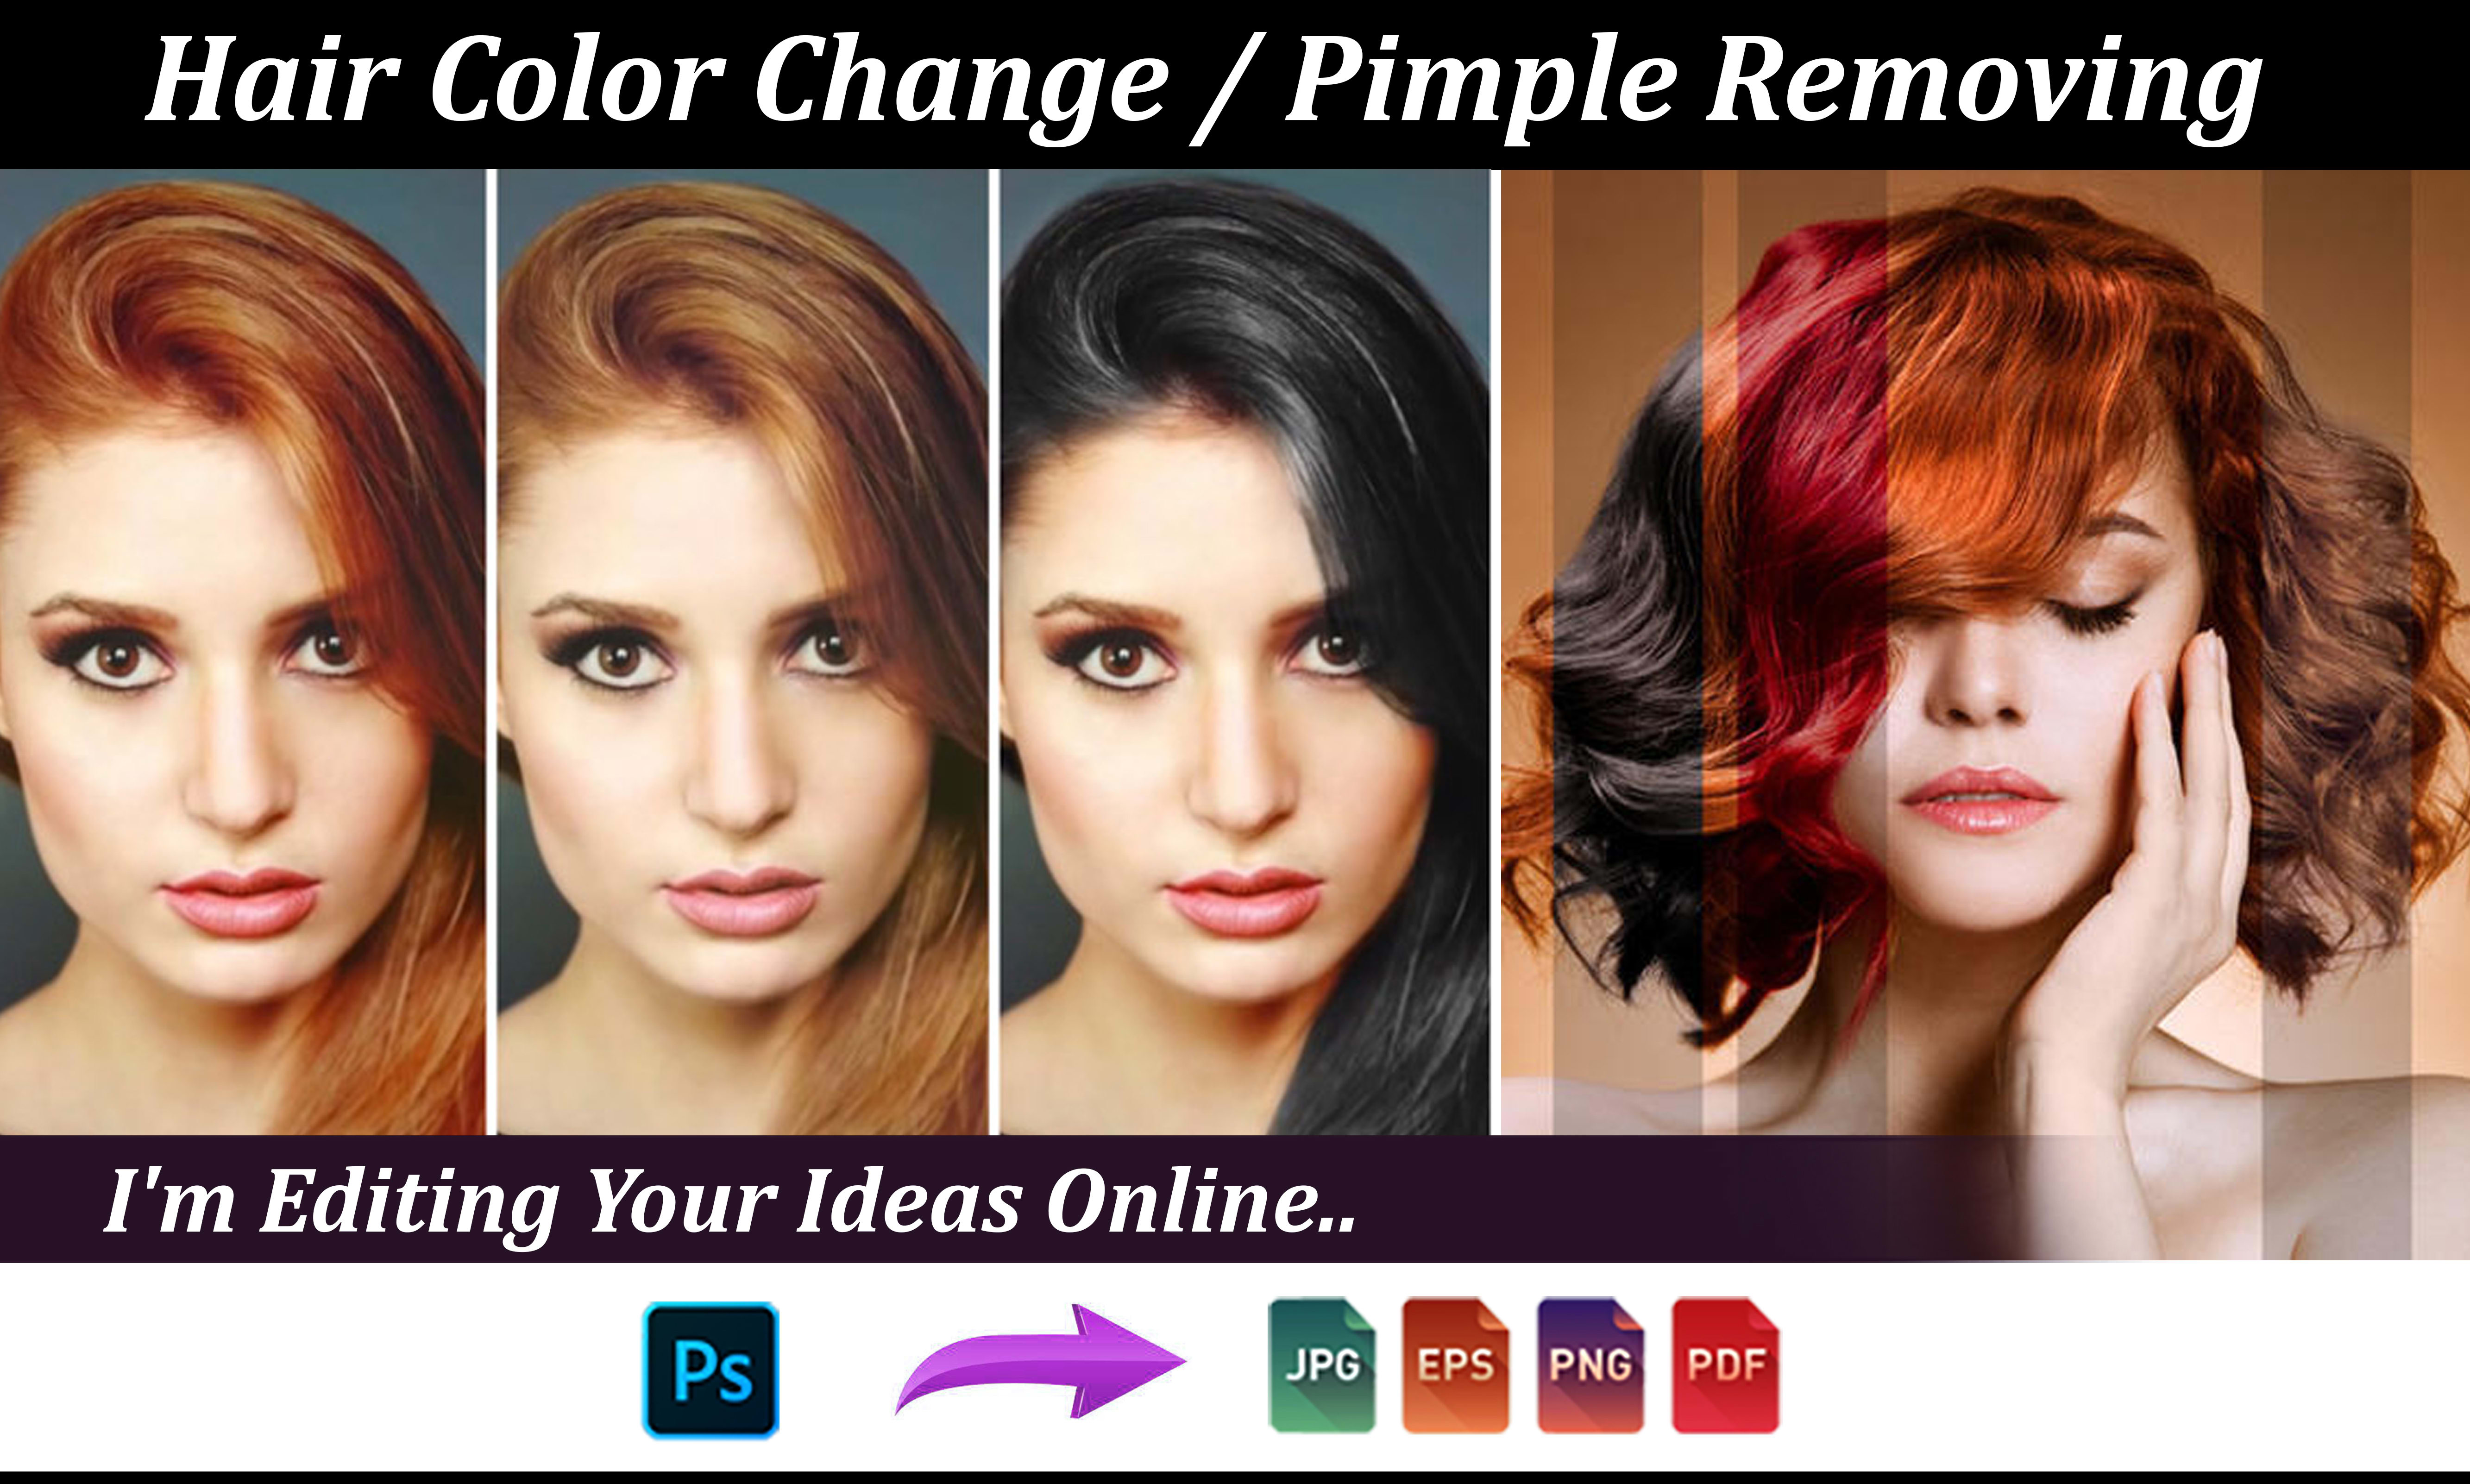 Do photoshop editing, pimple removing, hair color, background changing by  Damindacreation | Fiverr